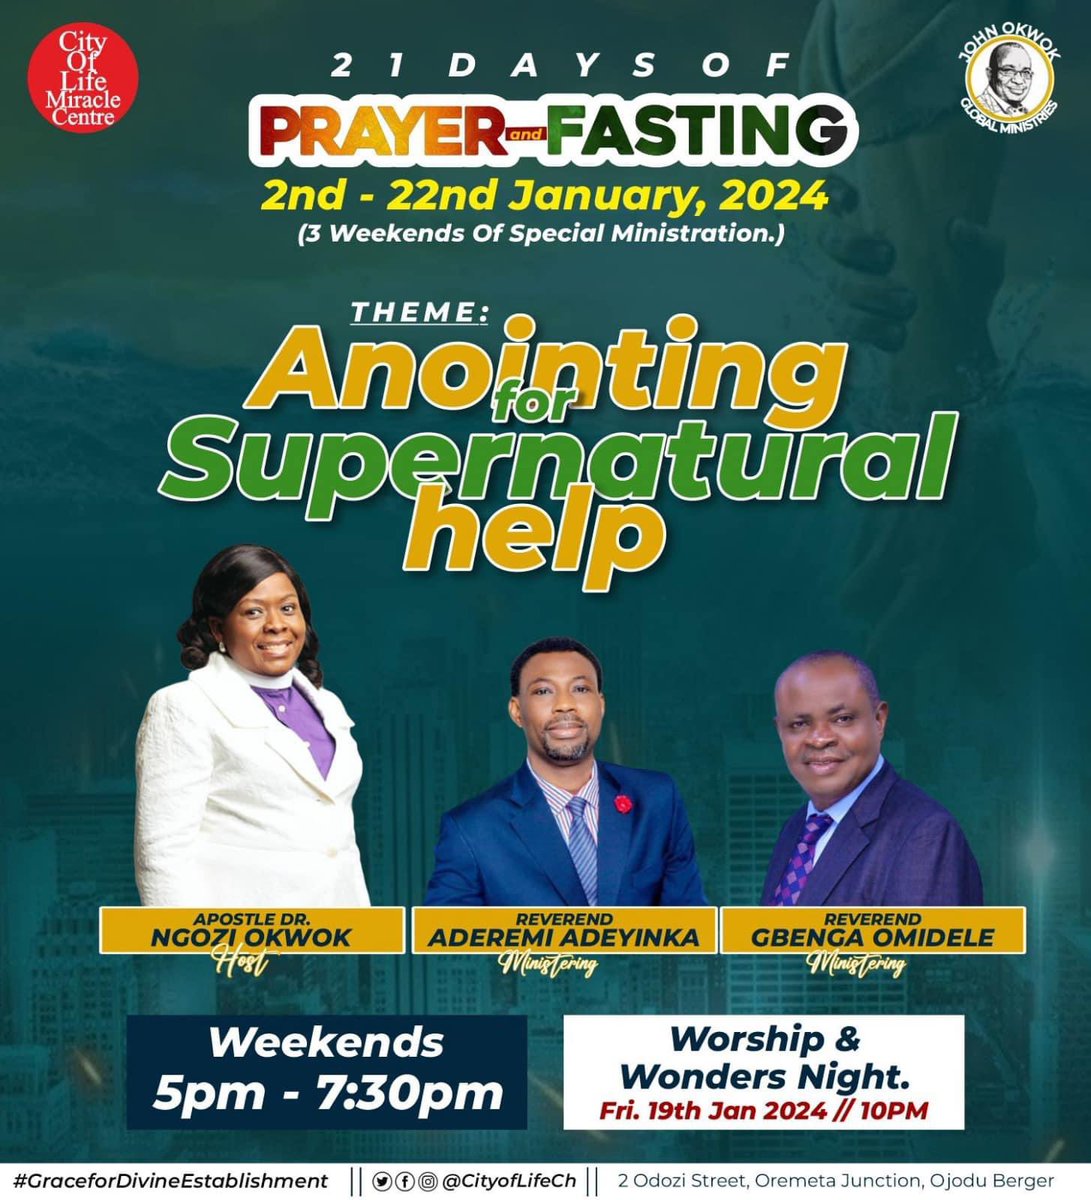 We are so glad to see you at church today!
It’s Day 20 of the 21 Days Prayers and Fasting 🔥🔥🔥🔥

#supernaturalhelp24 #CityOfLifeCh #SundayService